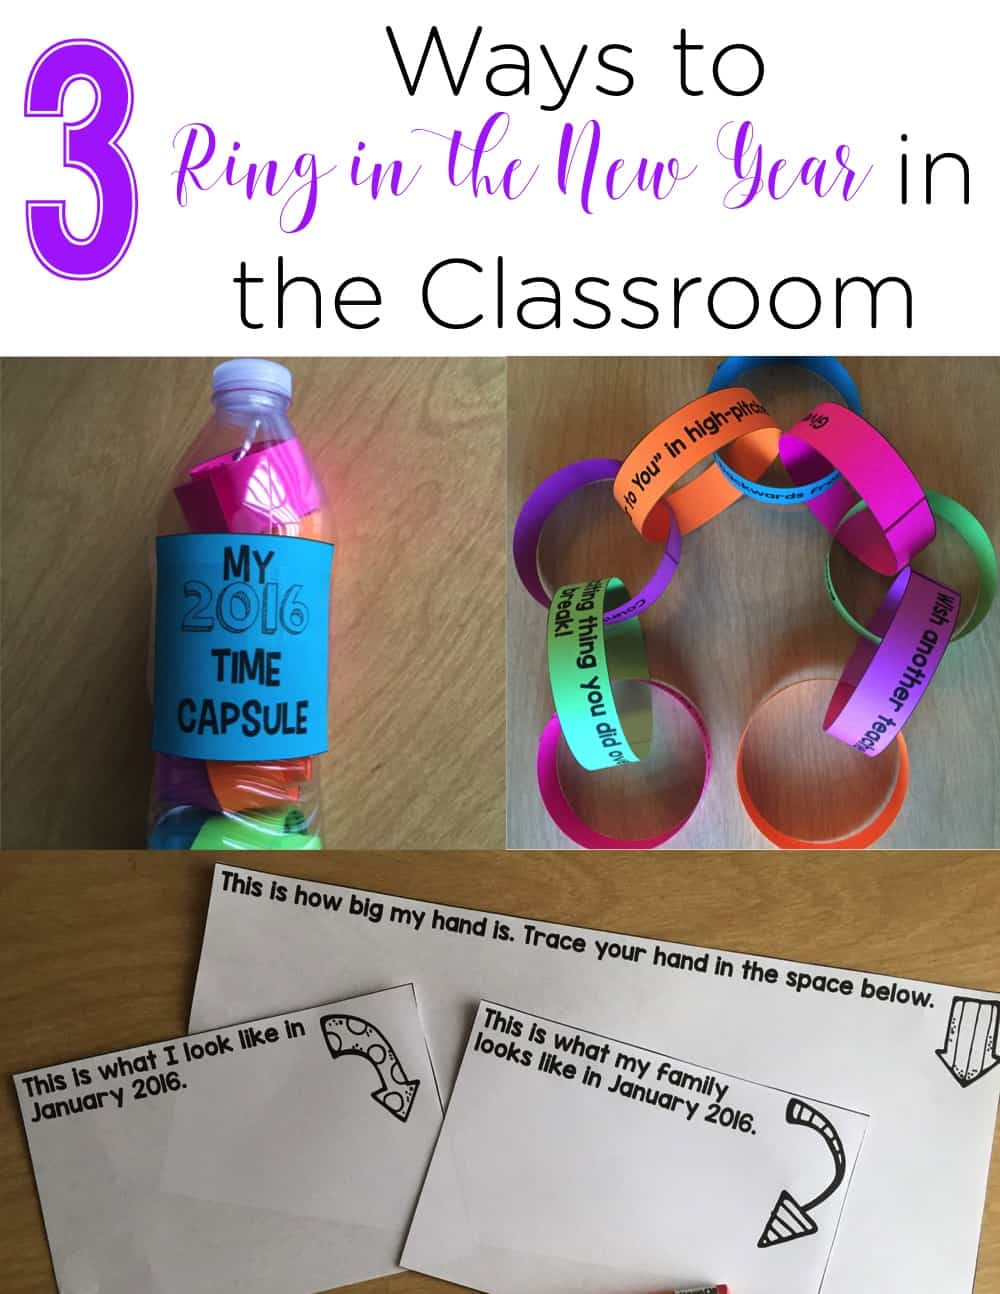 If you are looking for some fun ways to celebrate the new year and set some goals in the classroom, this FREEBIE is perfect for your classroom! I can't wait to try number 3! #FirstGrade #NewYearsActivities